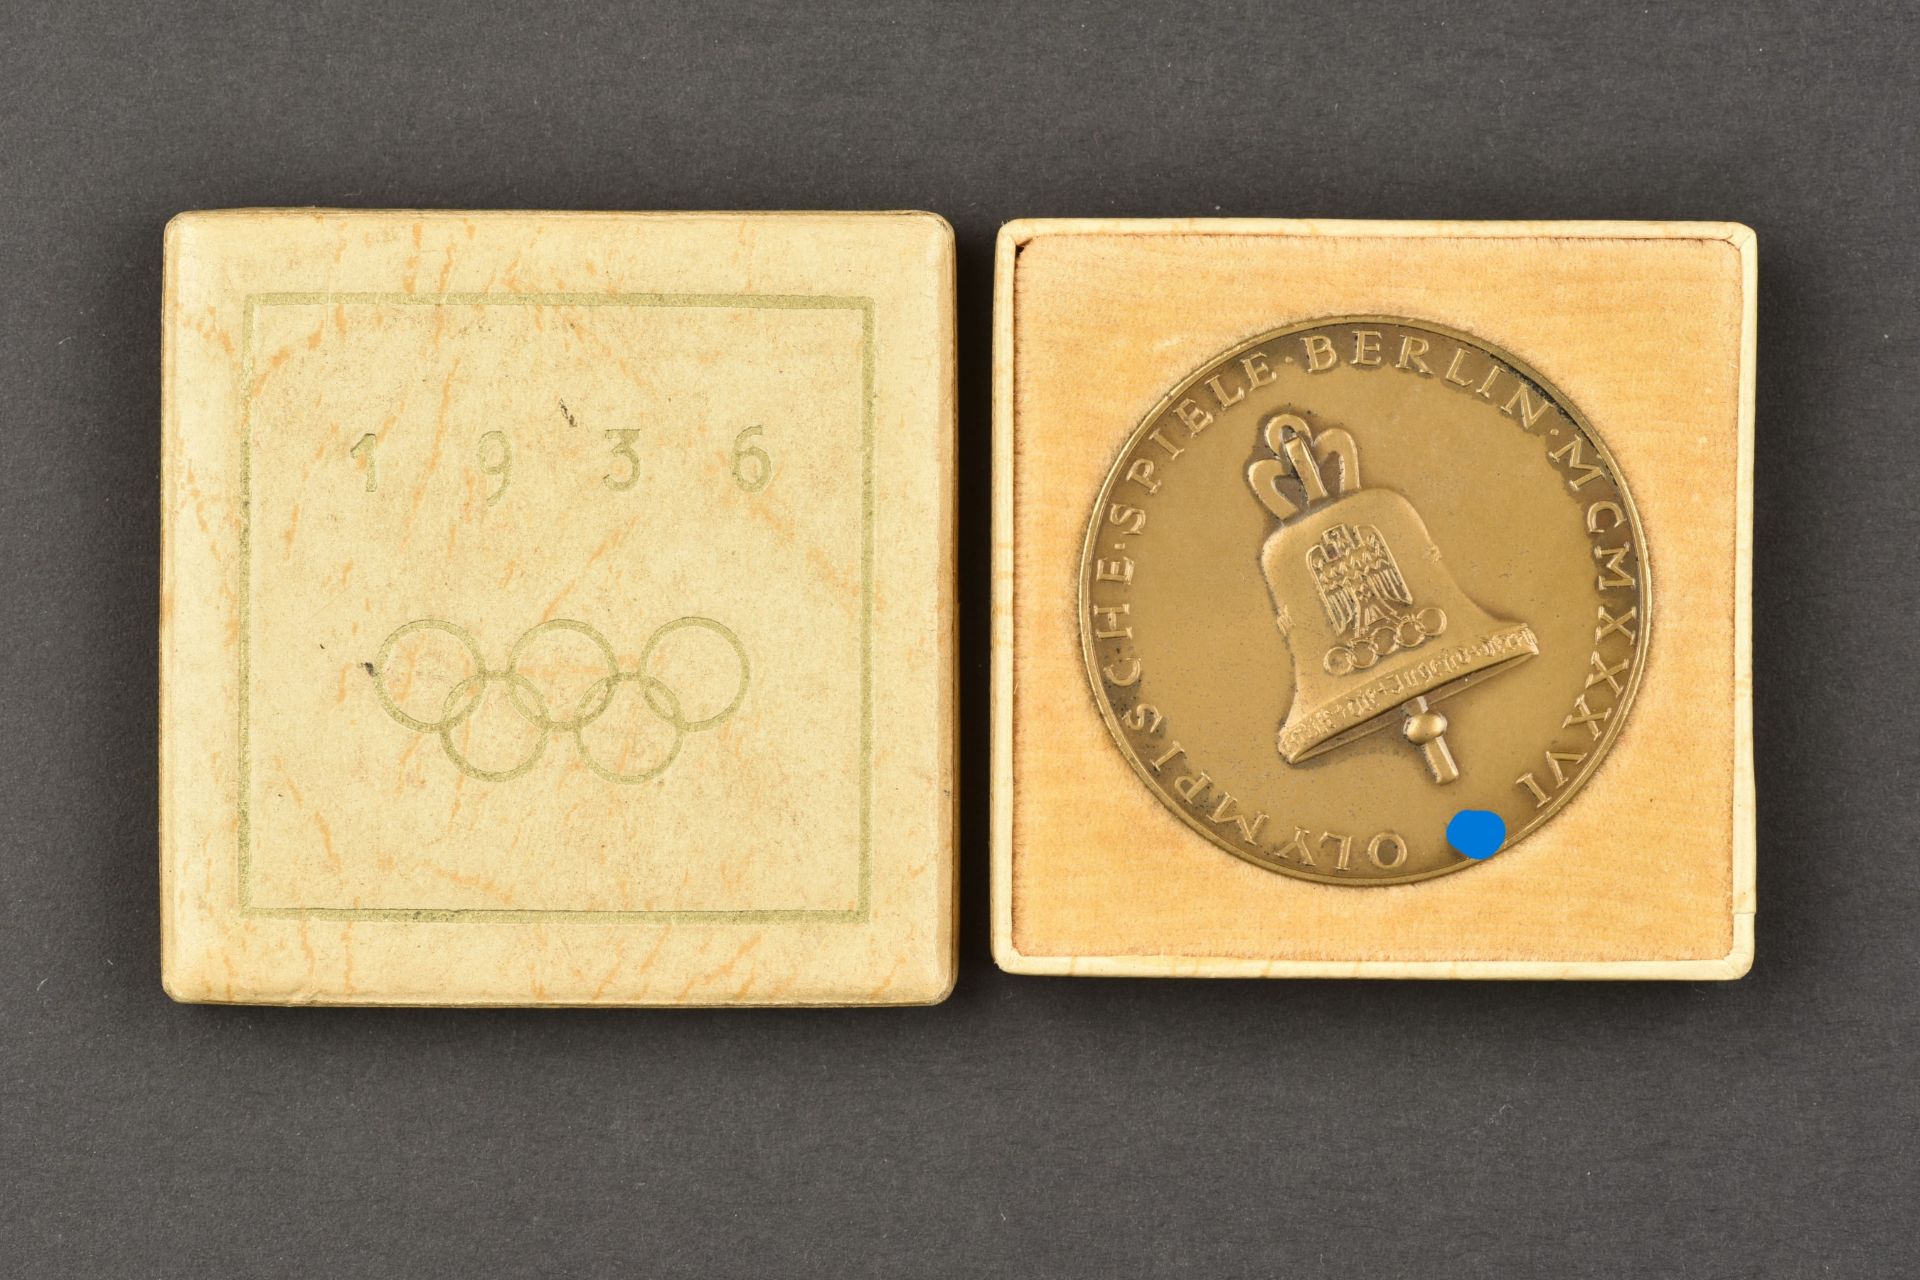 Medaille de table des Jeux olympique. Olympic Games table medal.